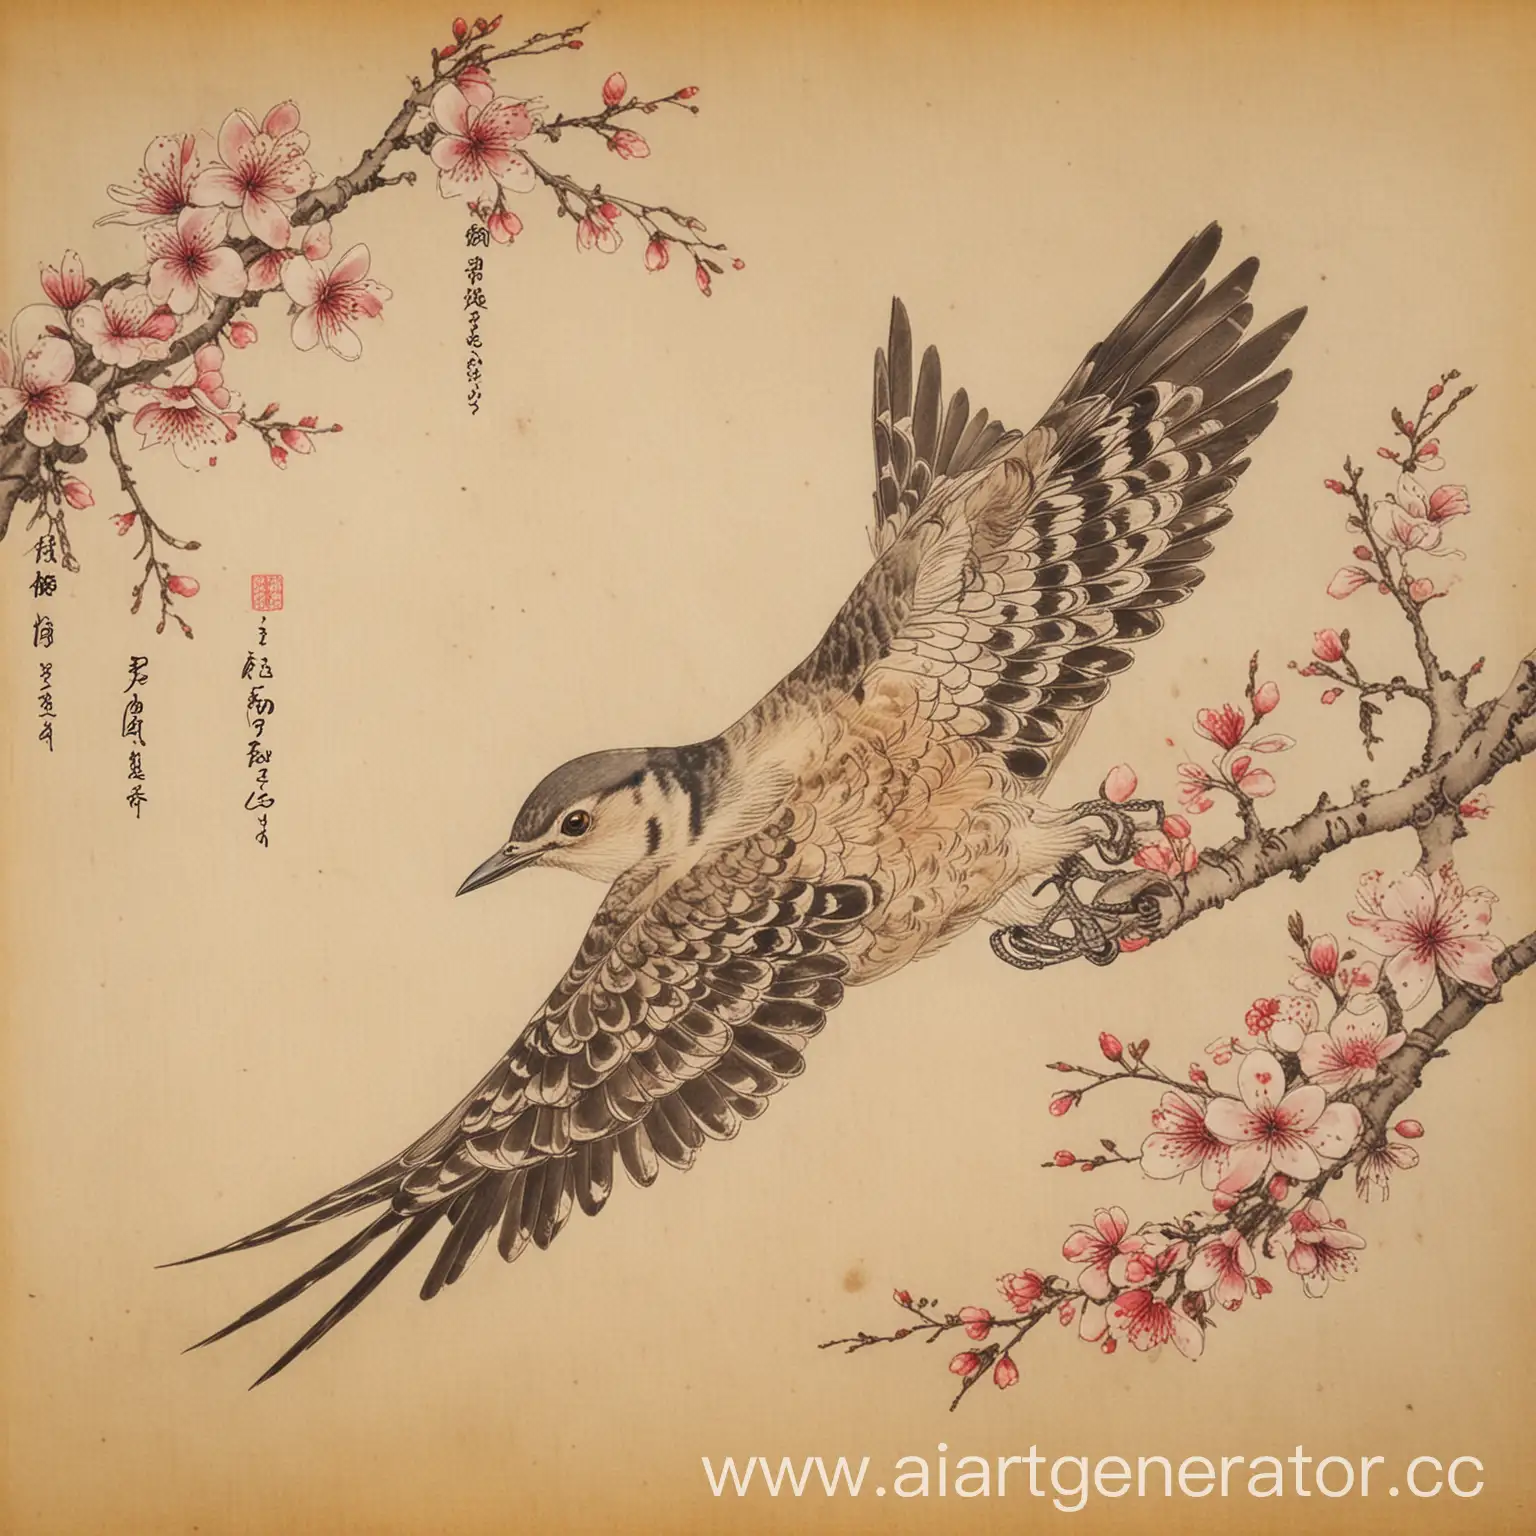 Graceful-Japanese-Cuckoo-in-Flight-Amid-Cherry-Blossoms-on-Aged-Parchment